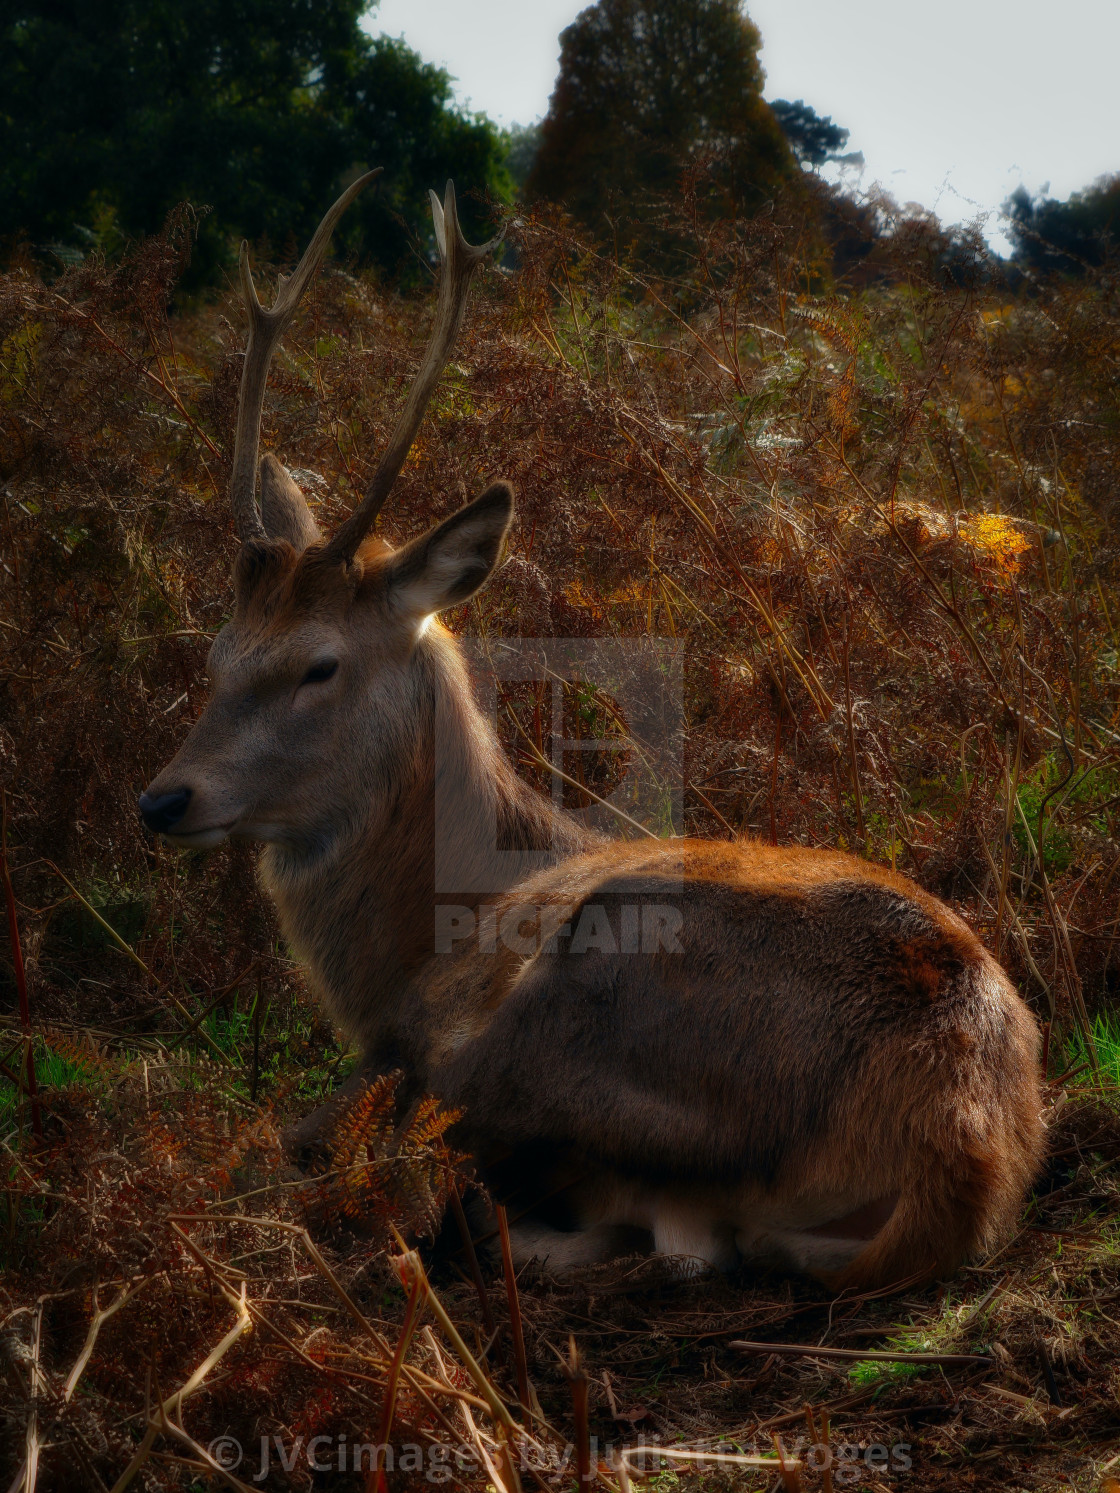 "Red Stag Sitting Down" stock image